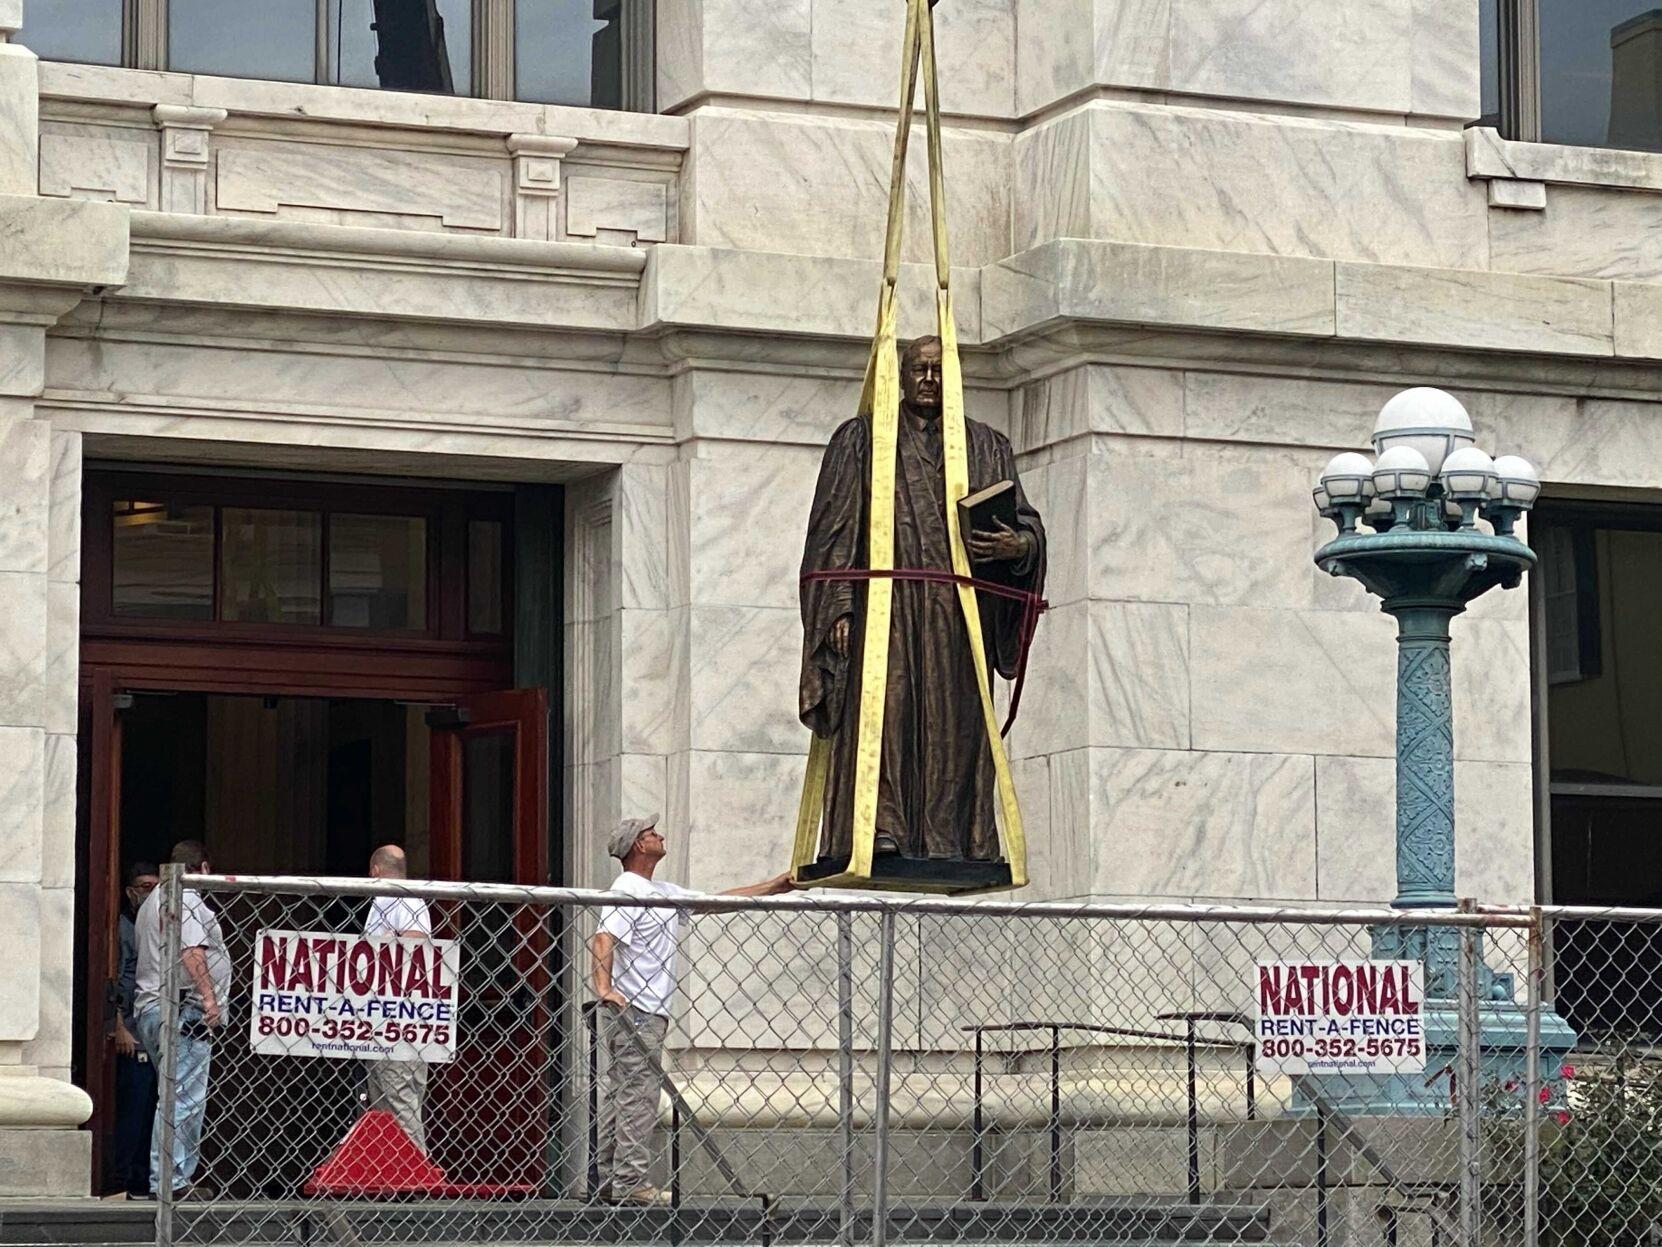 E.D. White statue removed from steps of Louisiana Supreme Court